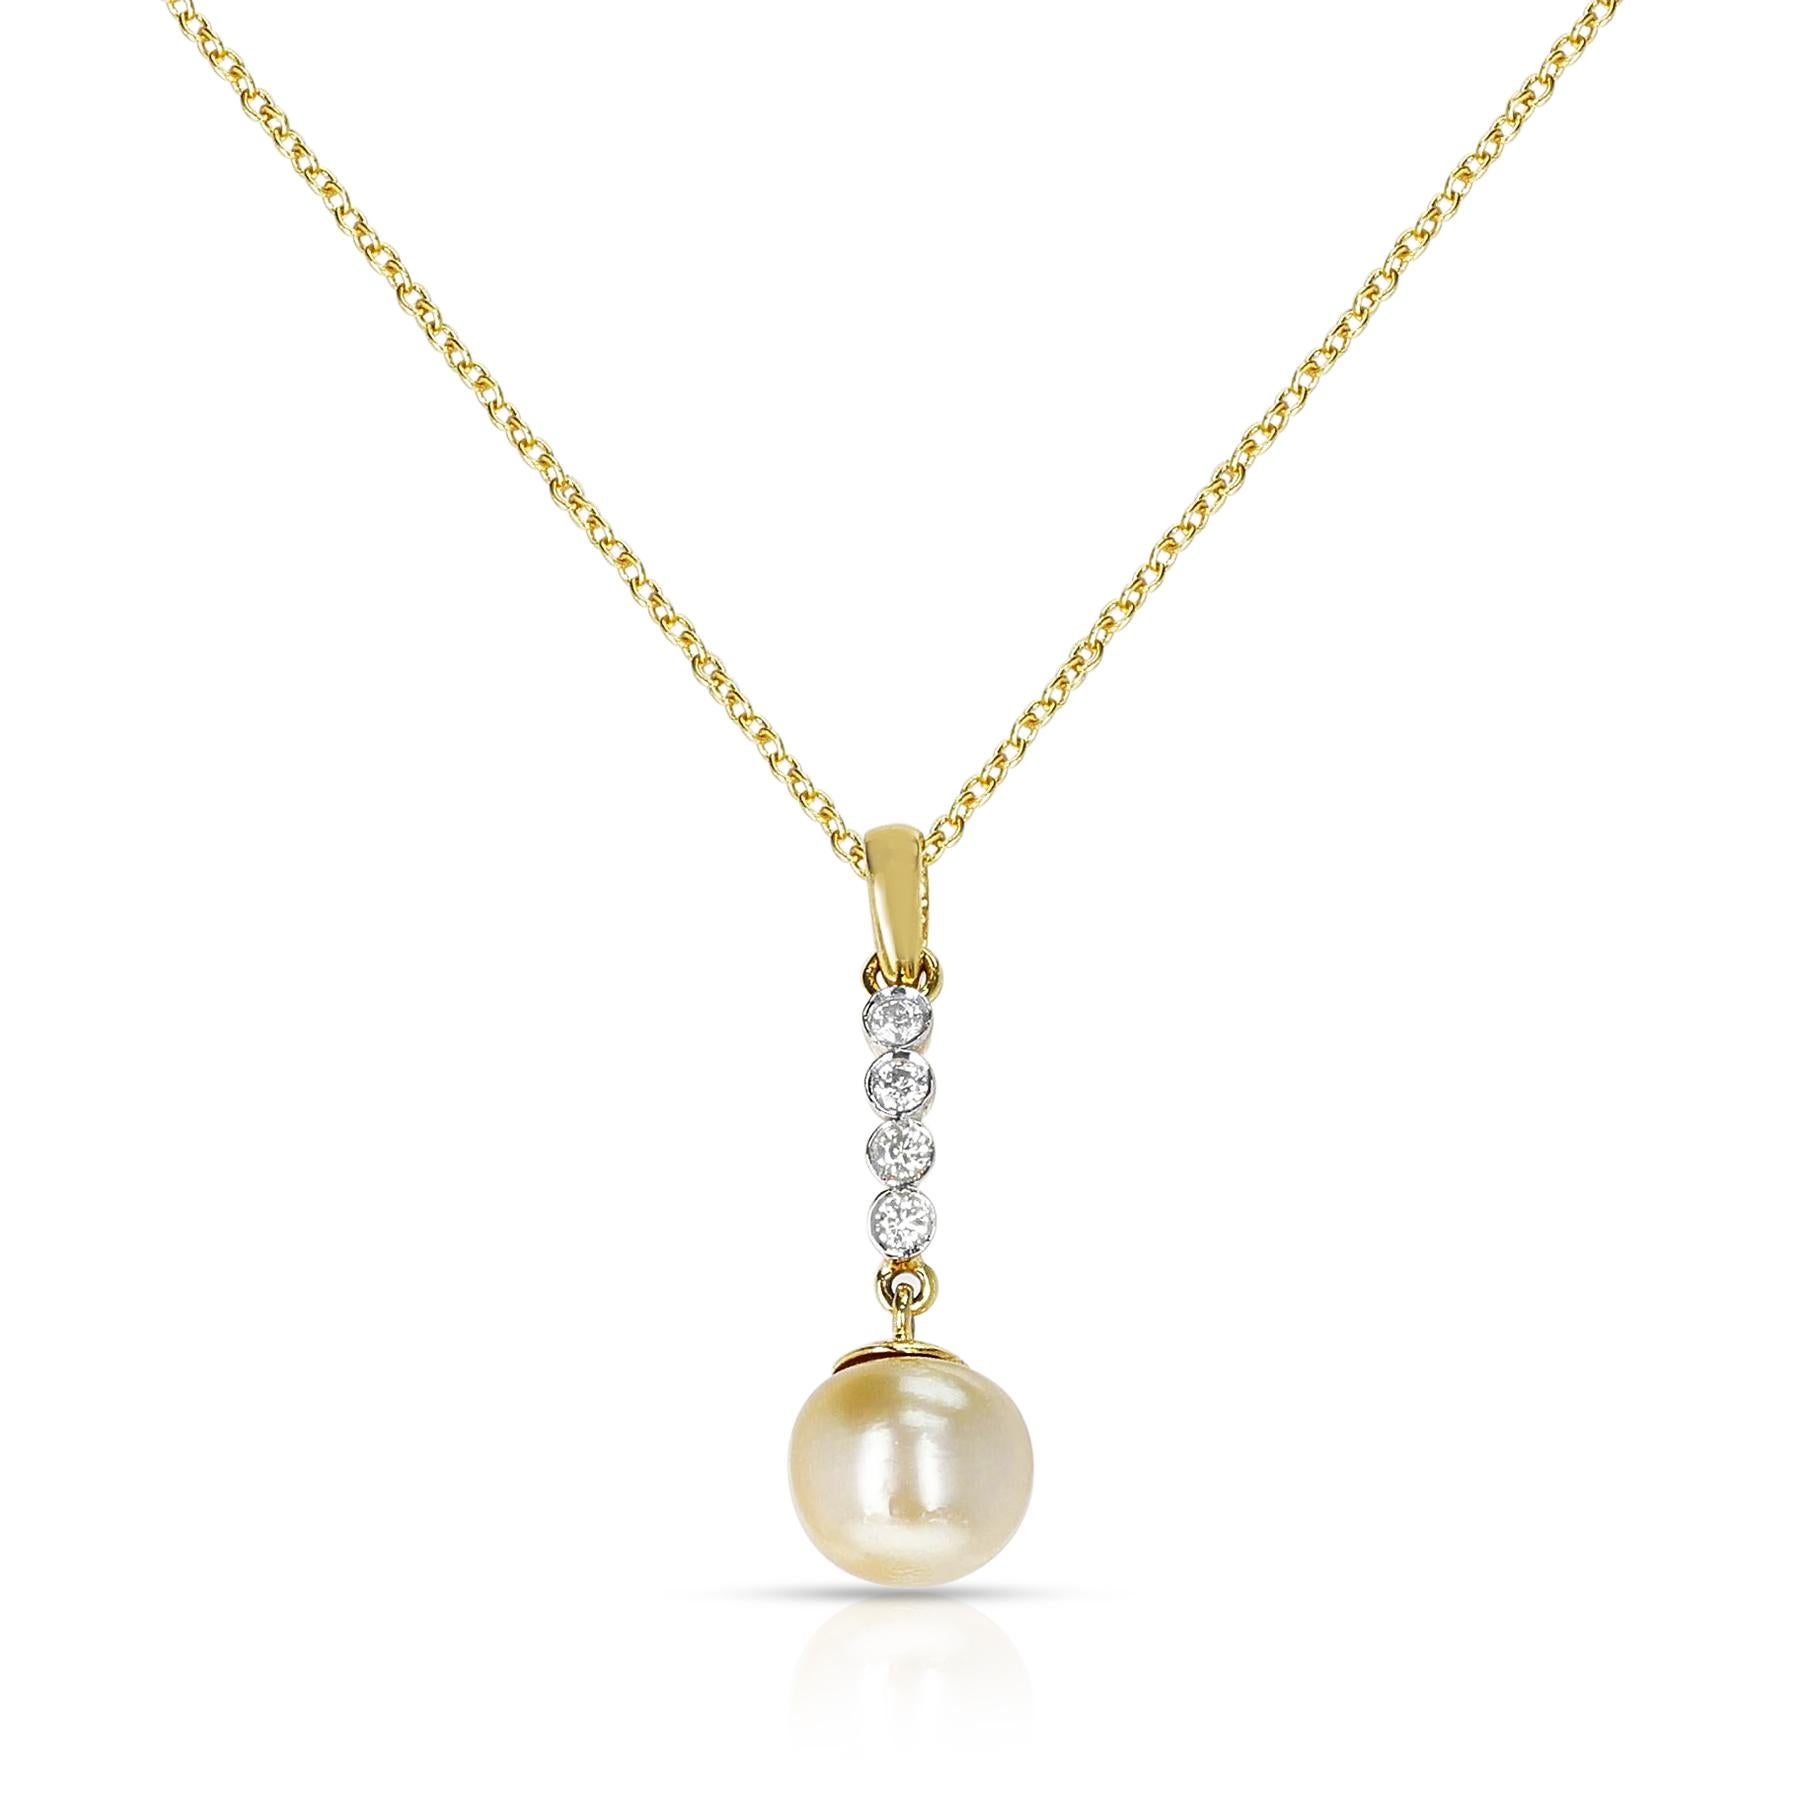 10.40 Ct. South Sea Pearl and 0.25 Diamond Pendant, 14K Gold In Excellent Condition For Sale In New York, NY